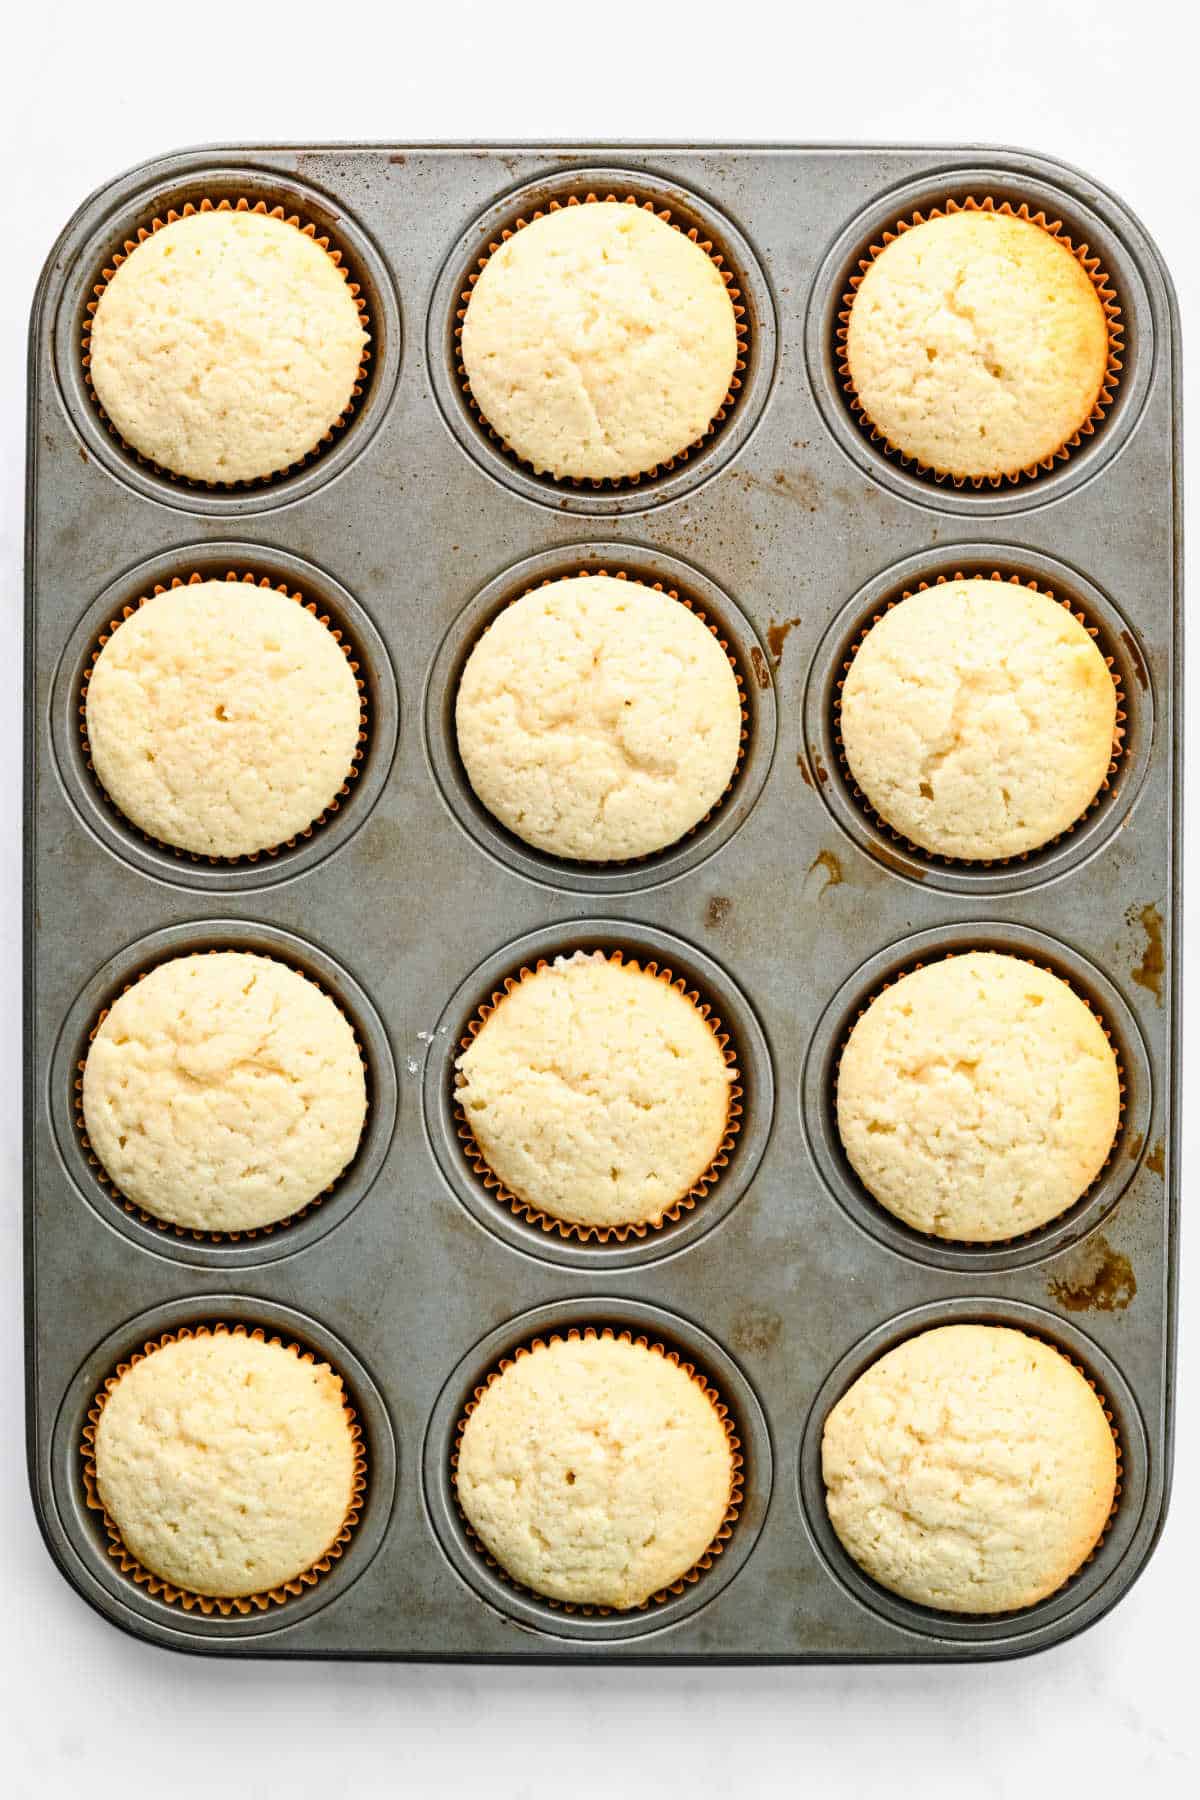 Baked white cupcakes for Christmas tree cupcakes in a muffin tin. 